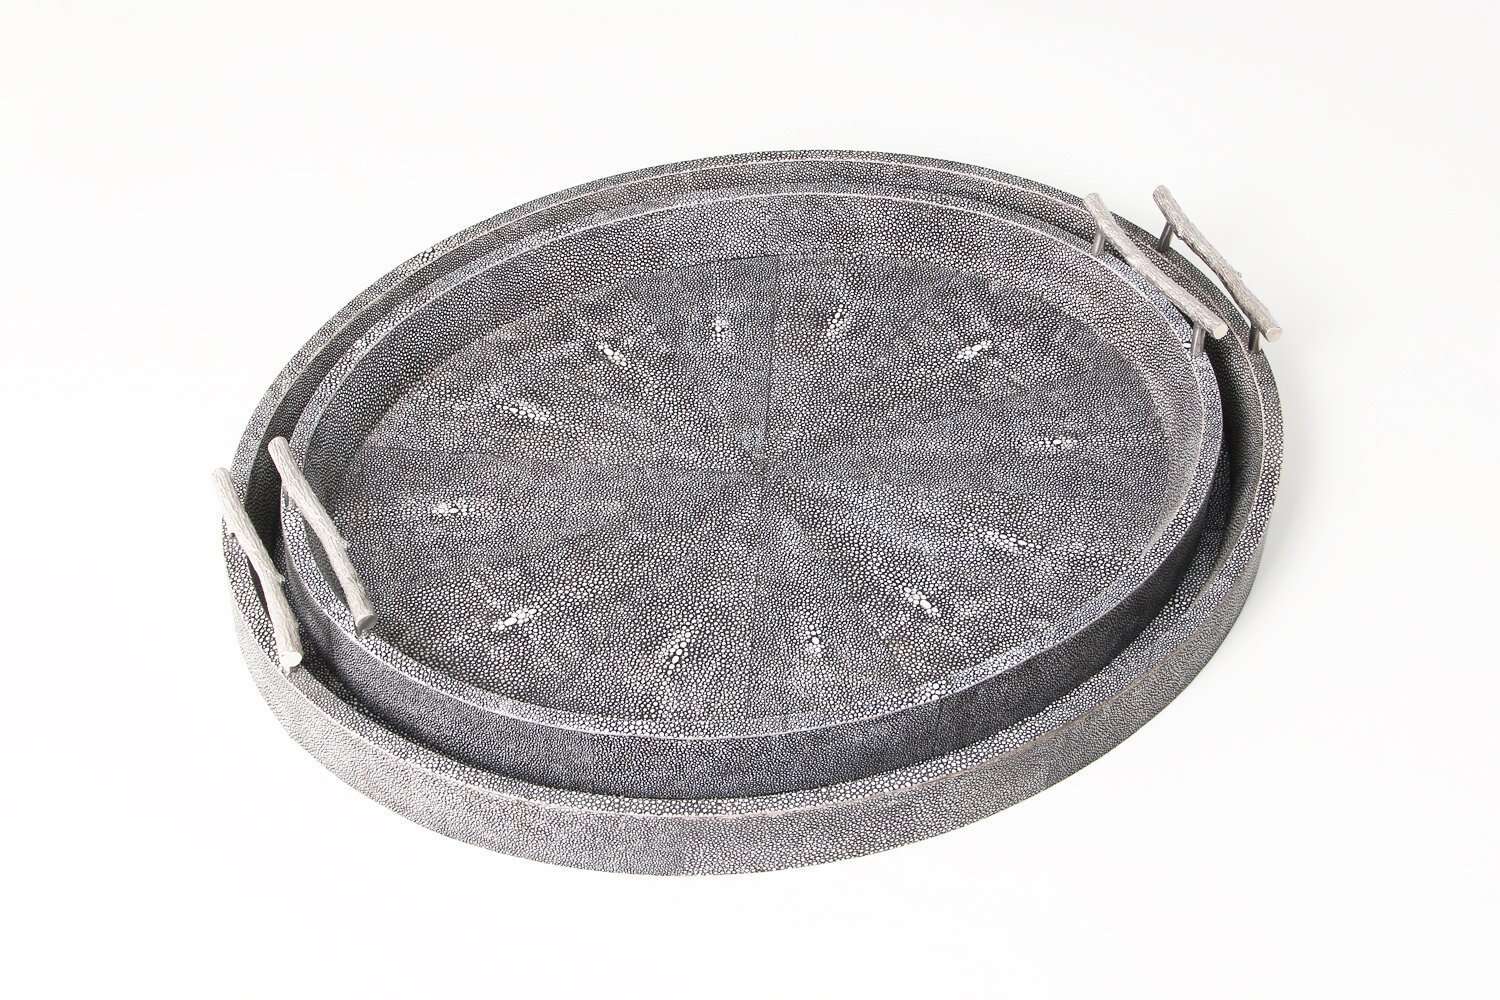 Serving tray unique Forwood Design grey shagreen drinks trays